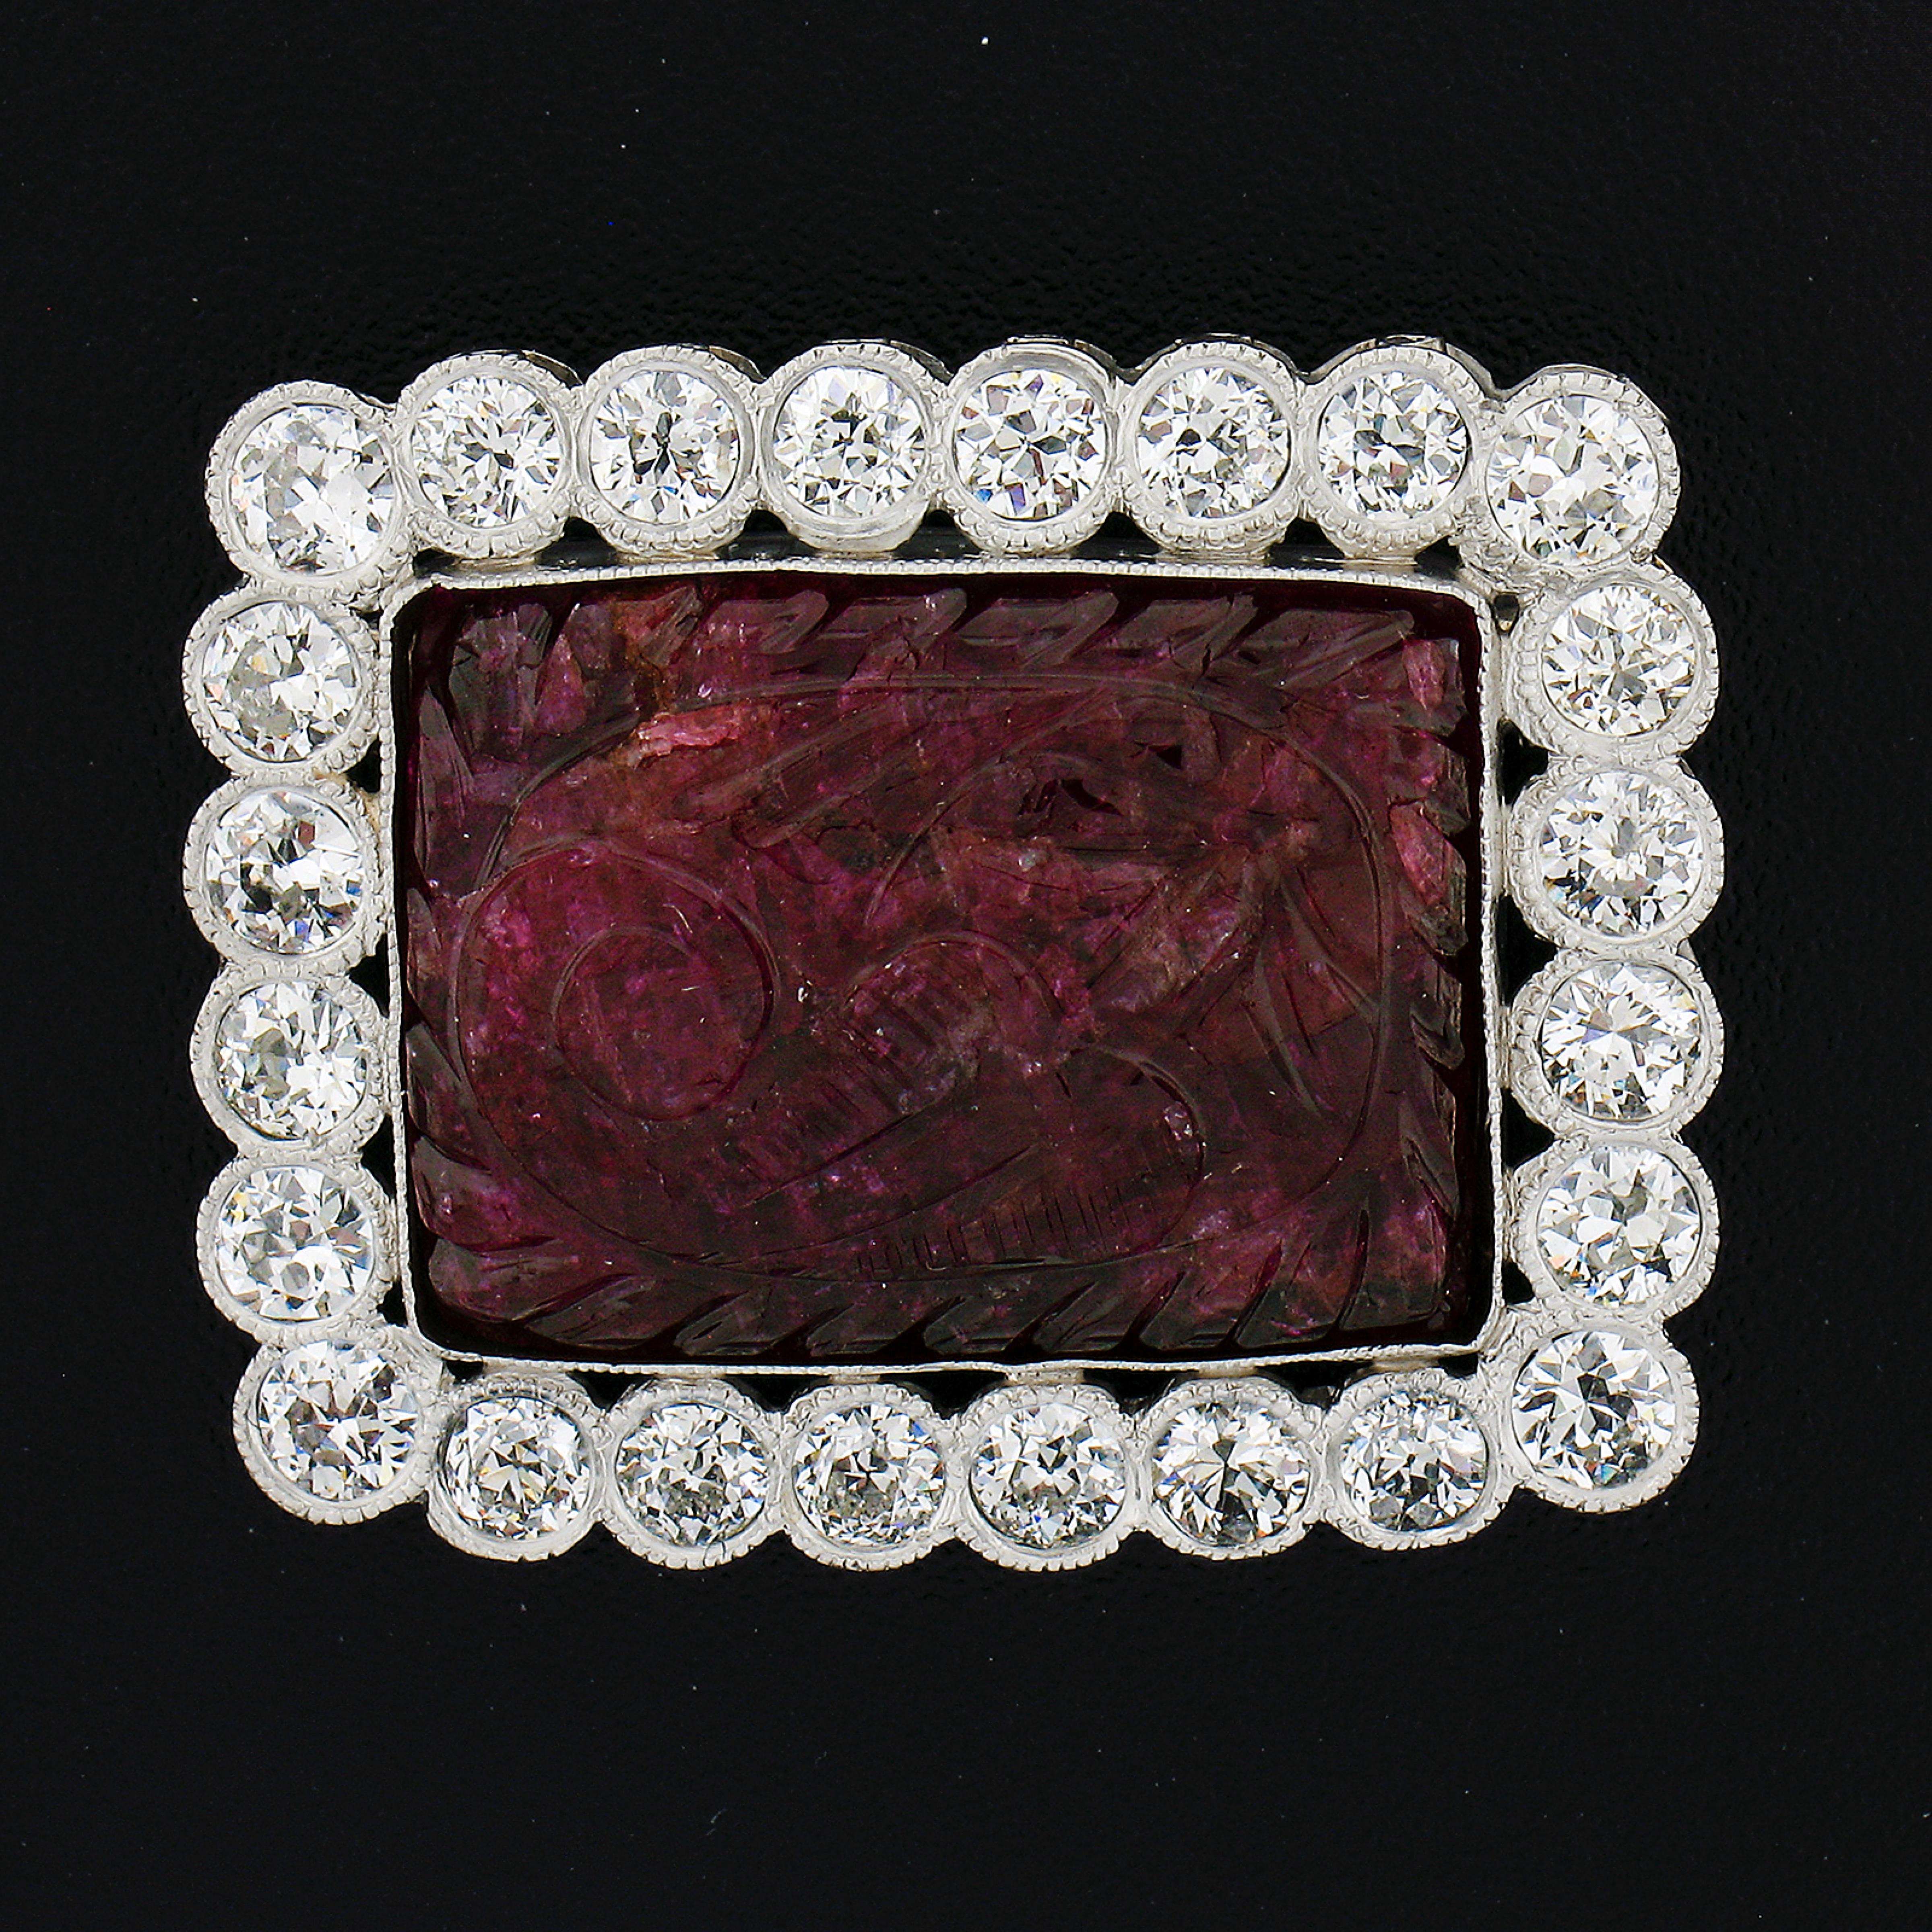 Here we have a beautiful vintage carved natural ruby brooch crafted from solid platinum. The carving features a floral pattern and it is a rectangular shaped cut. The frame is adorned with bright old European cut Milgrain bezel set throughout. This